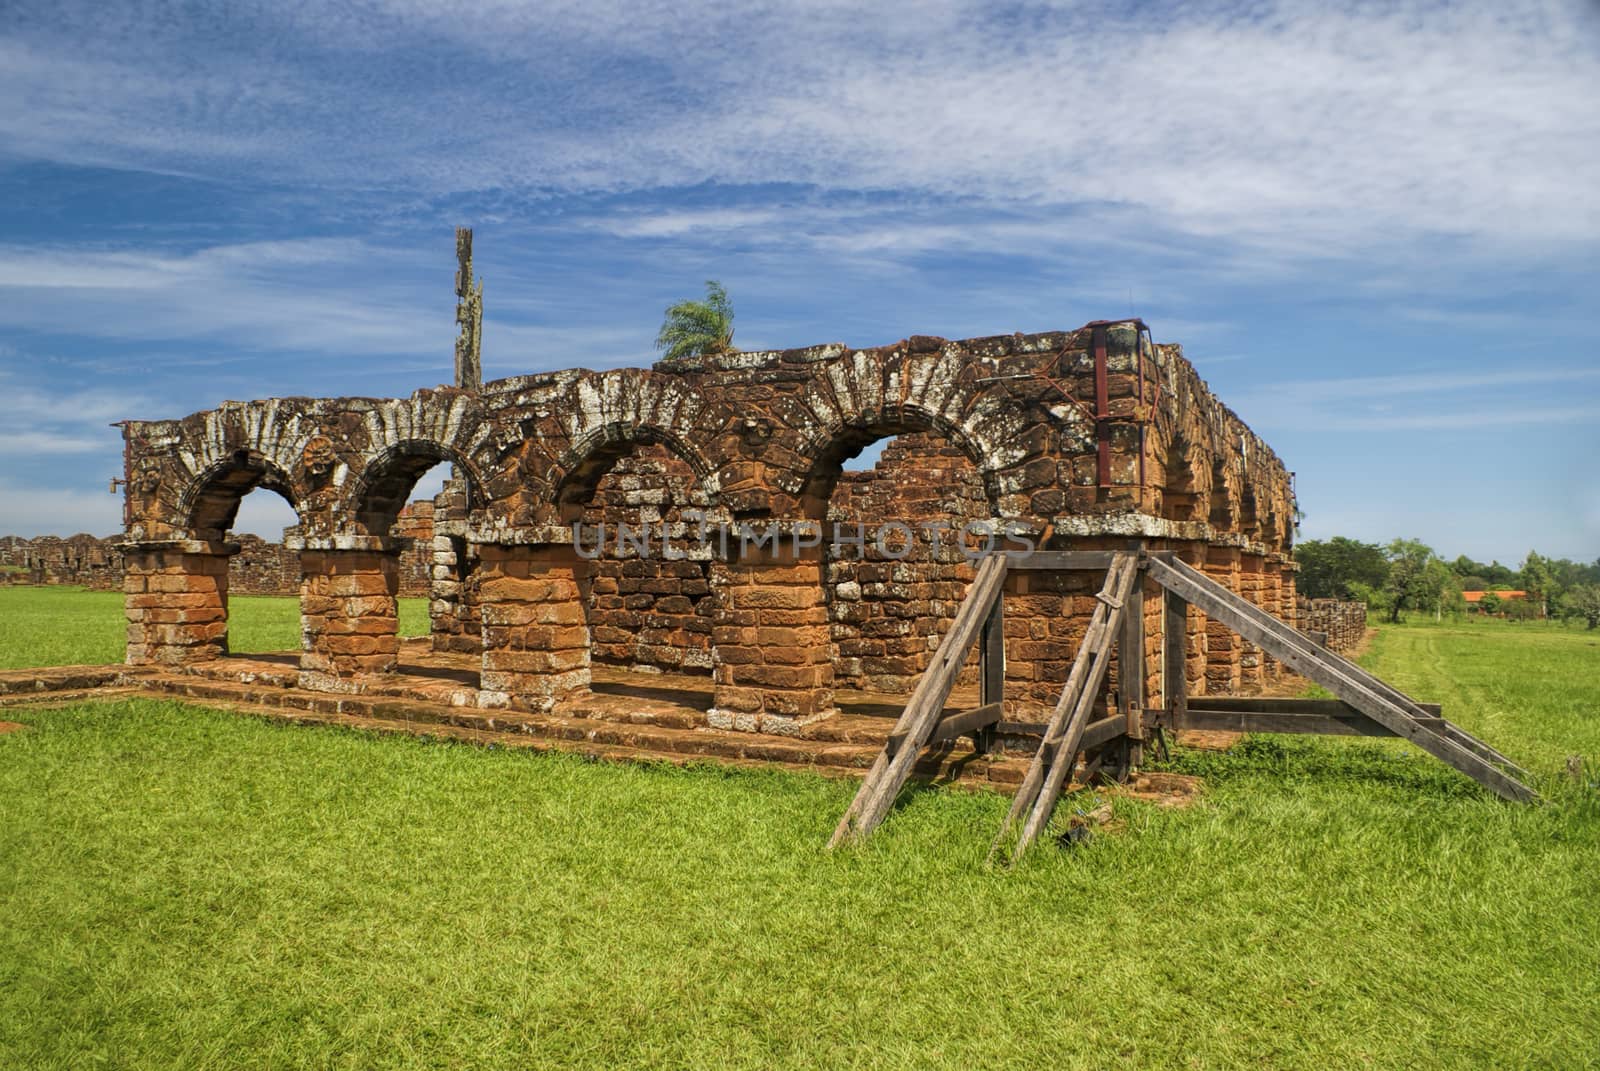 Encarnacion and jesuit ruins in Paraguay by MichalKnitl